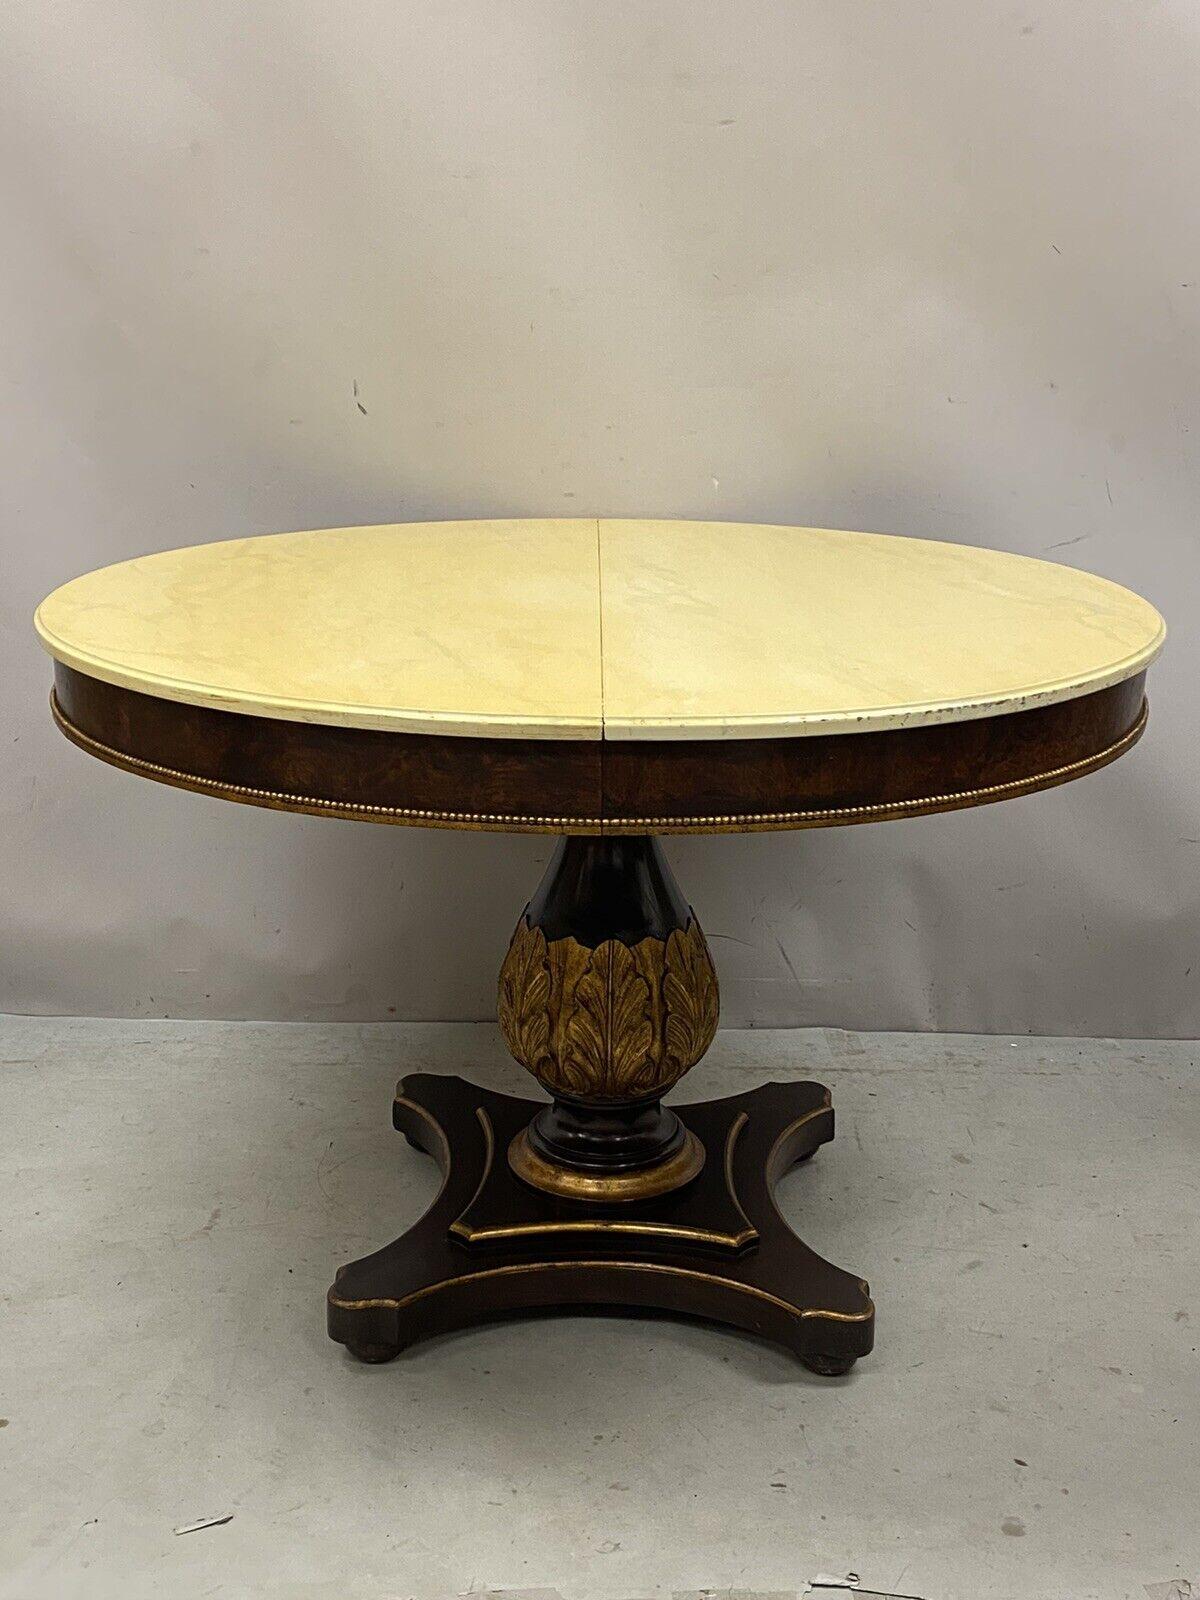 Vintage Italian Regency Style Pedestal Base Round Dining Table with Cream Lacquer Top. L'article comporte (2) feuilles de 18